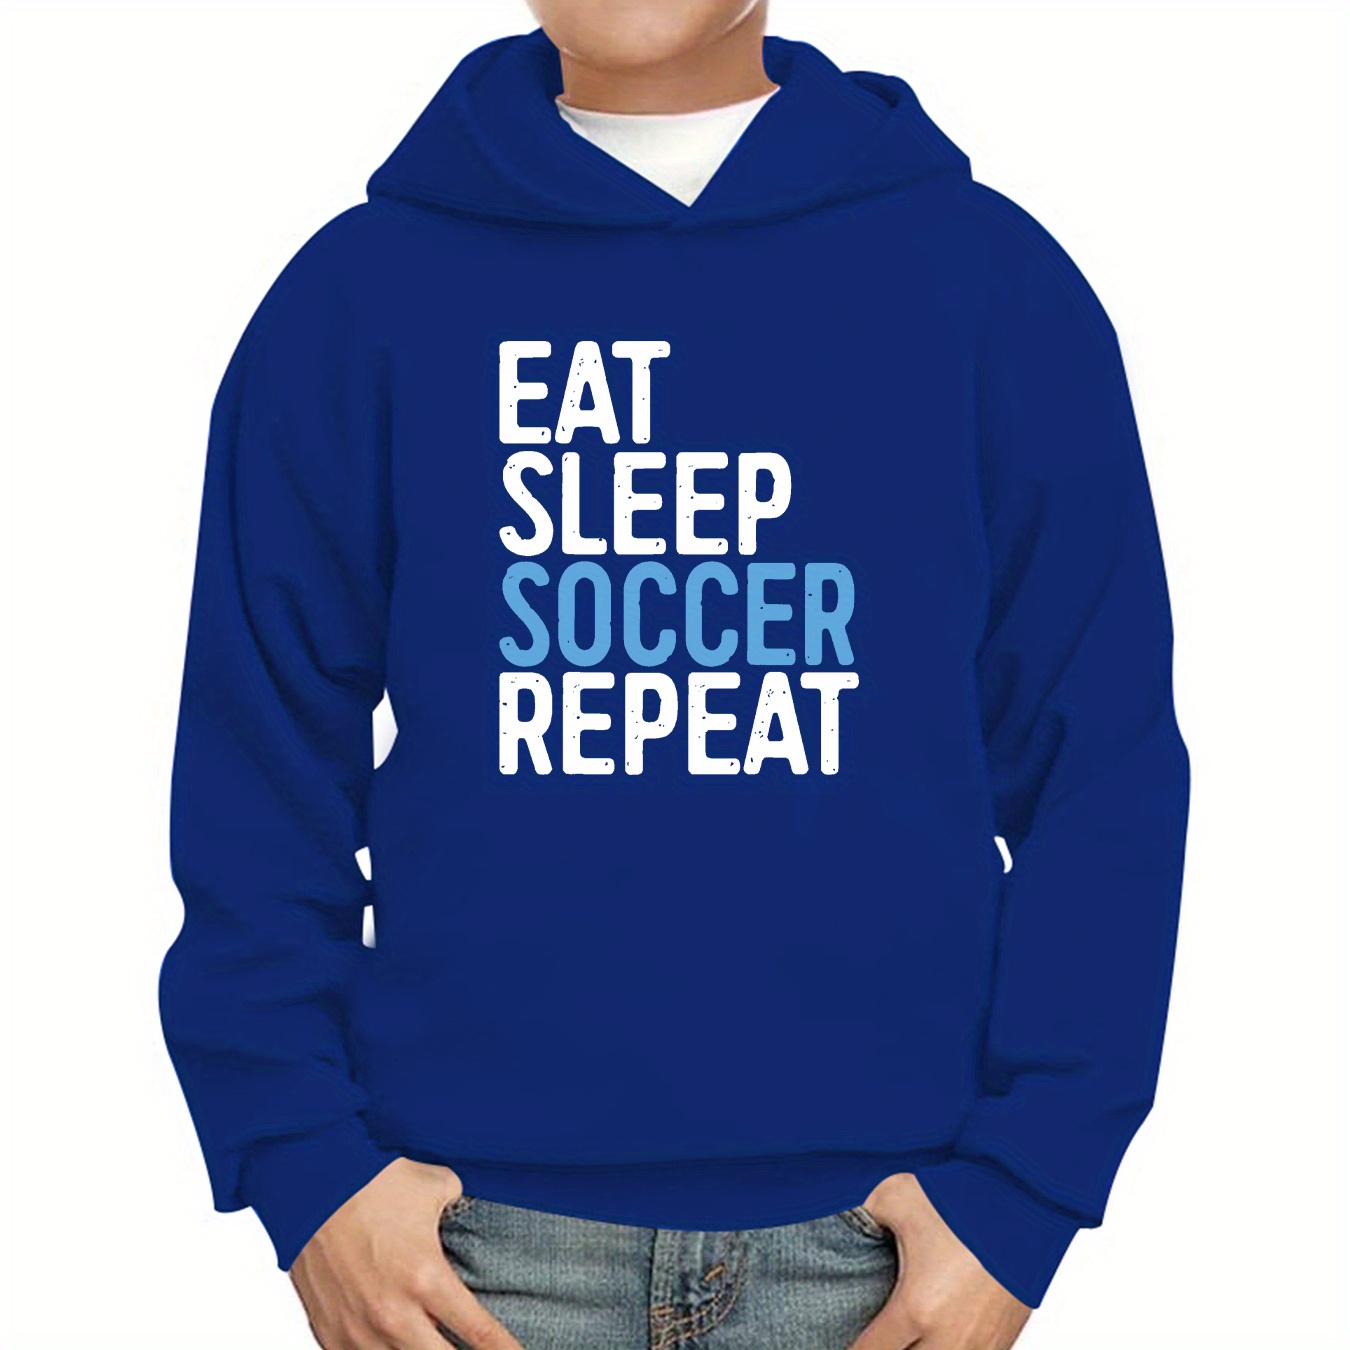 

Eat Sleep Soccer Repeat Letter Print Hoodies For Boys - Casual Graphic Design With Stretch Fabric For Comfortable Autumn/winter Wear